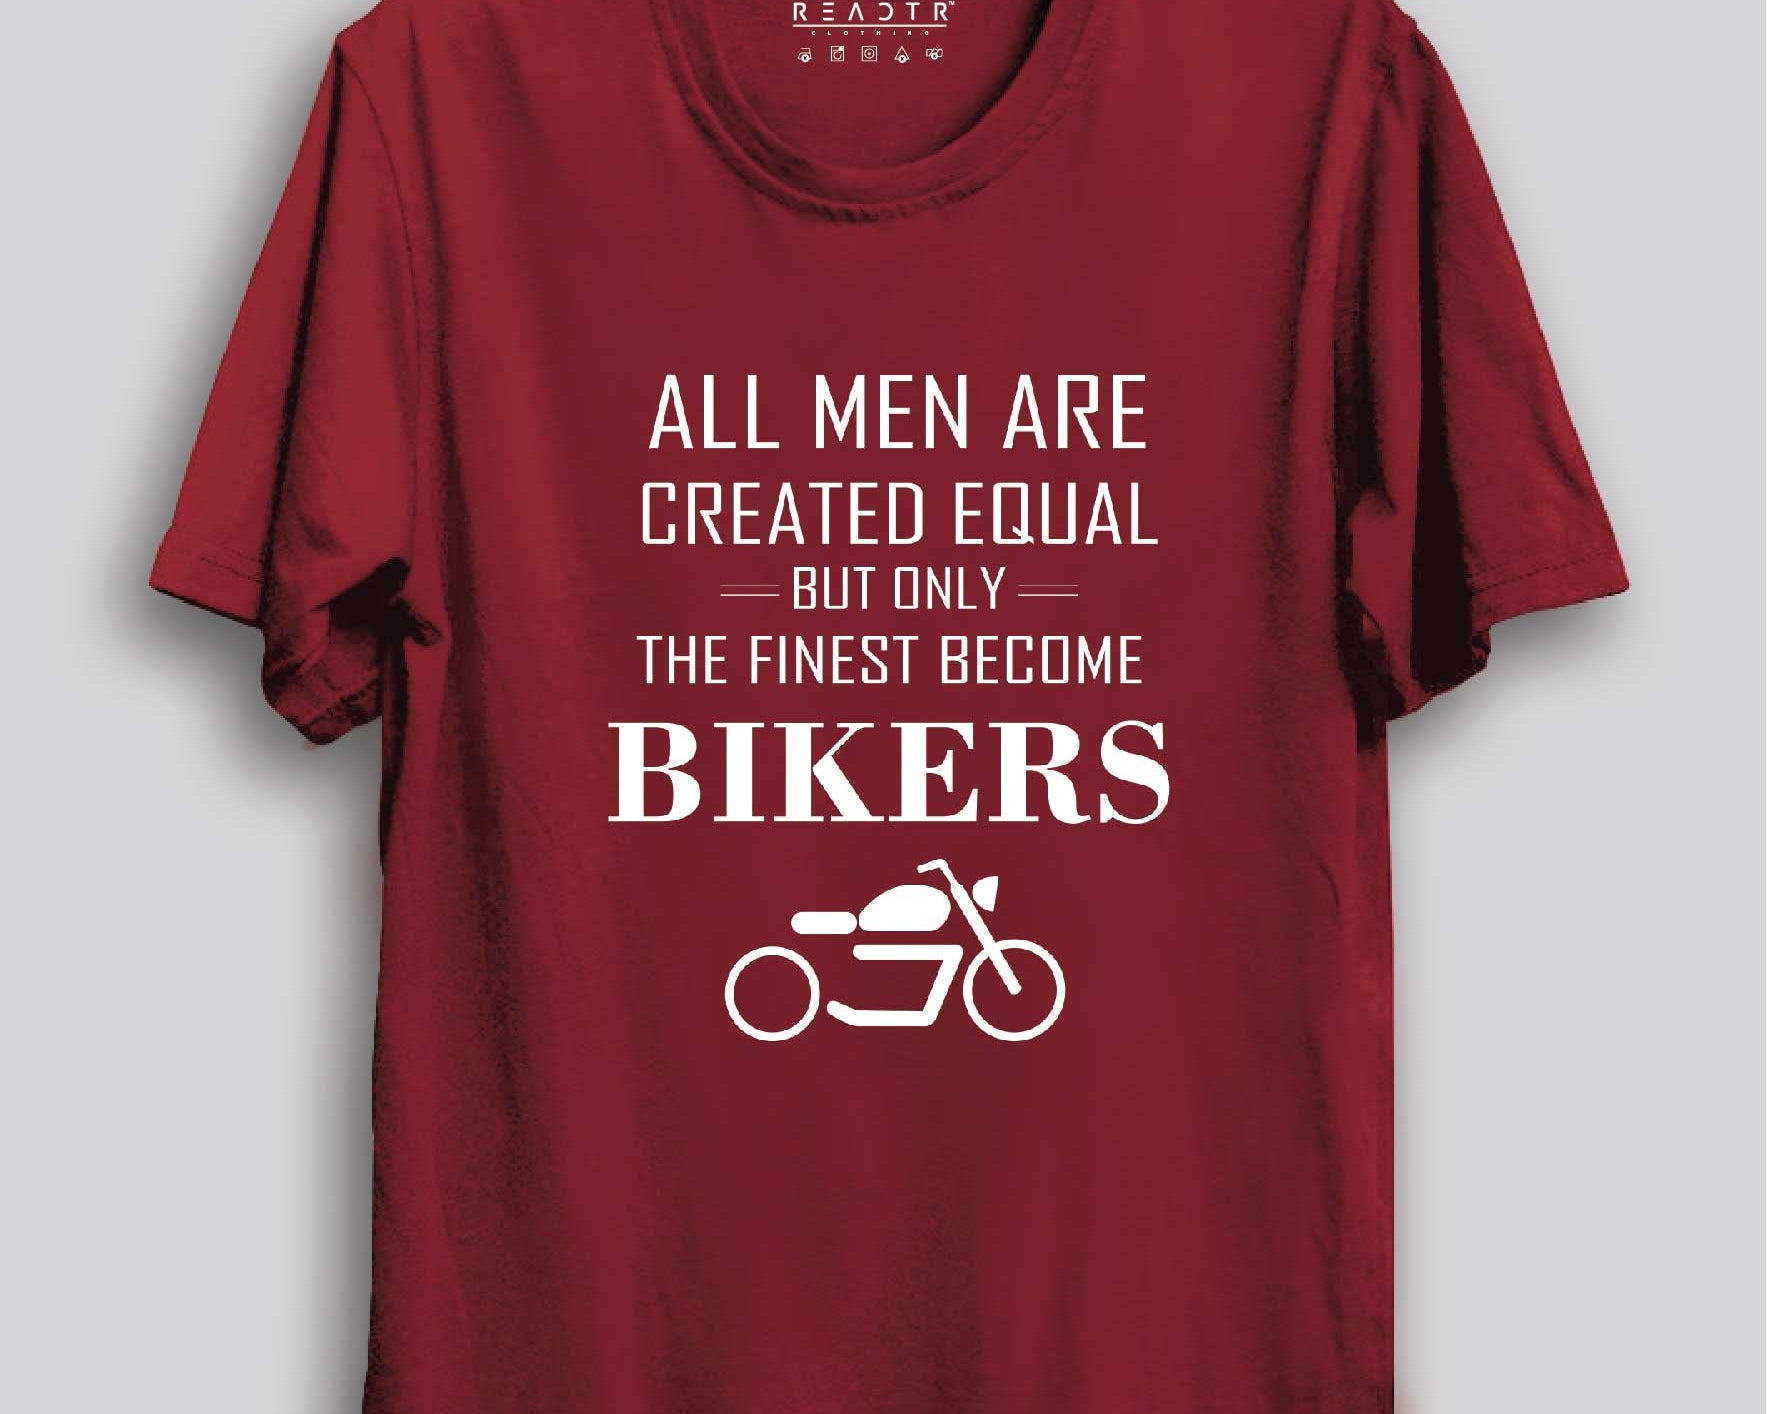 Only The Finest Become Bikers Reactr Tshirts For Men - Eyewearlabs